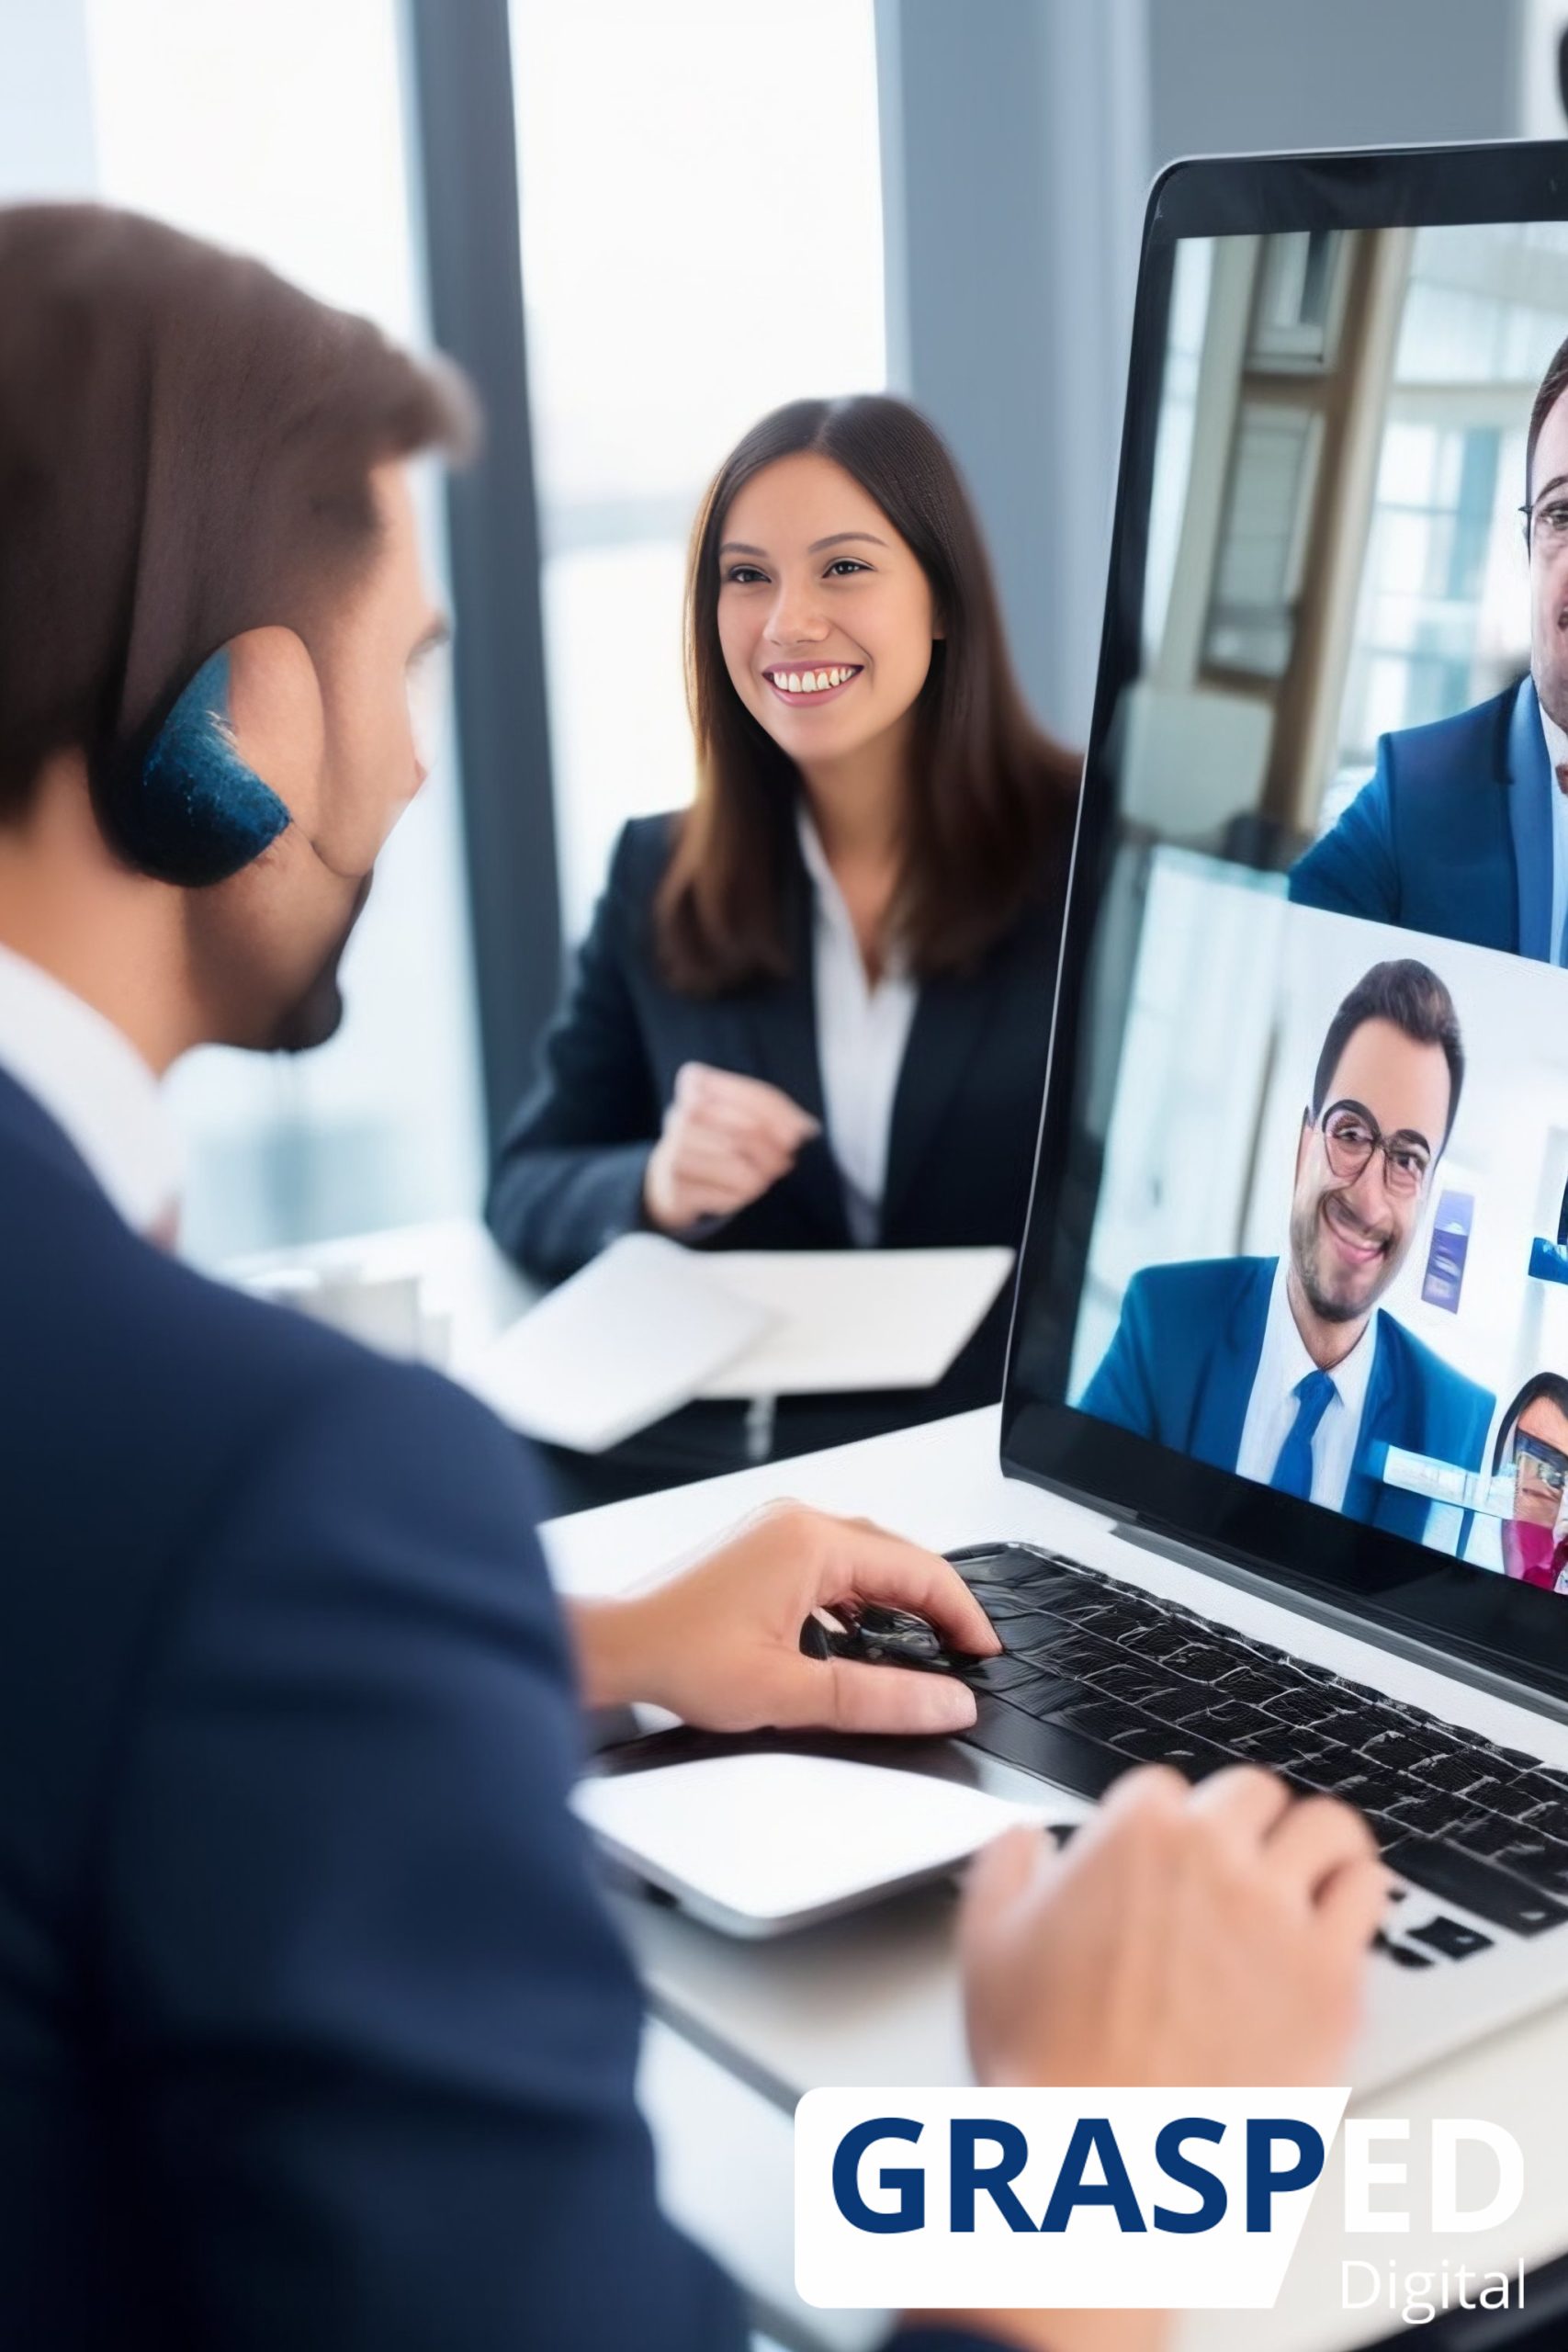 Case Study: Video Conferencing for a Digital Marketing Company